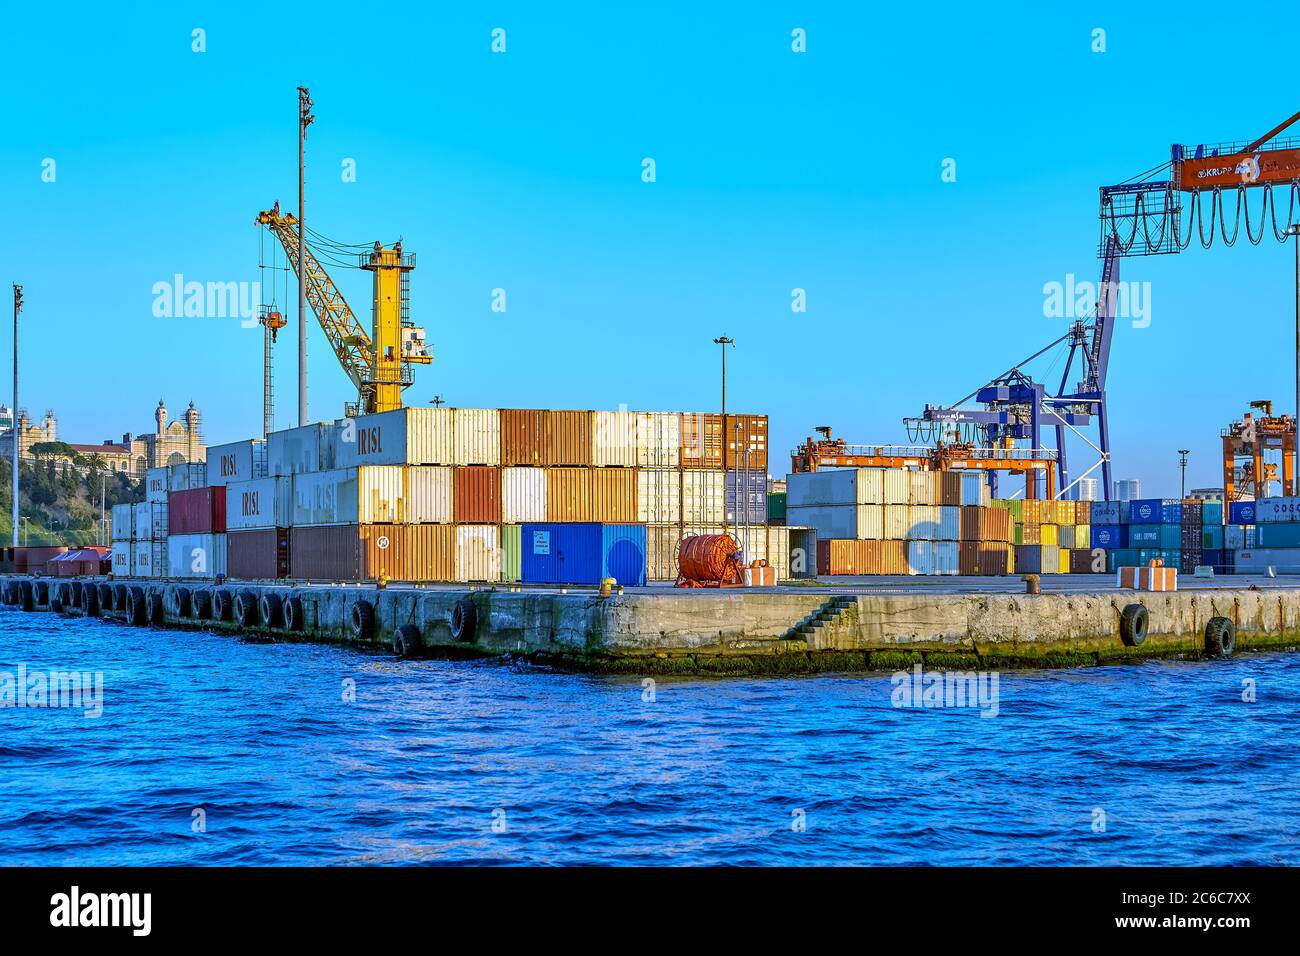 Istanbul, Turkey - February 13, 2020: Uncovered storage area or container terminal for  temporarily stored cargo in sea port. Freight shipping. Stock Photo